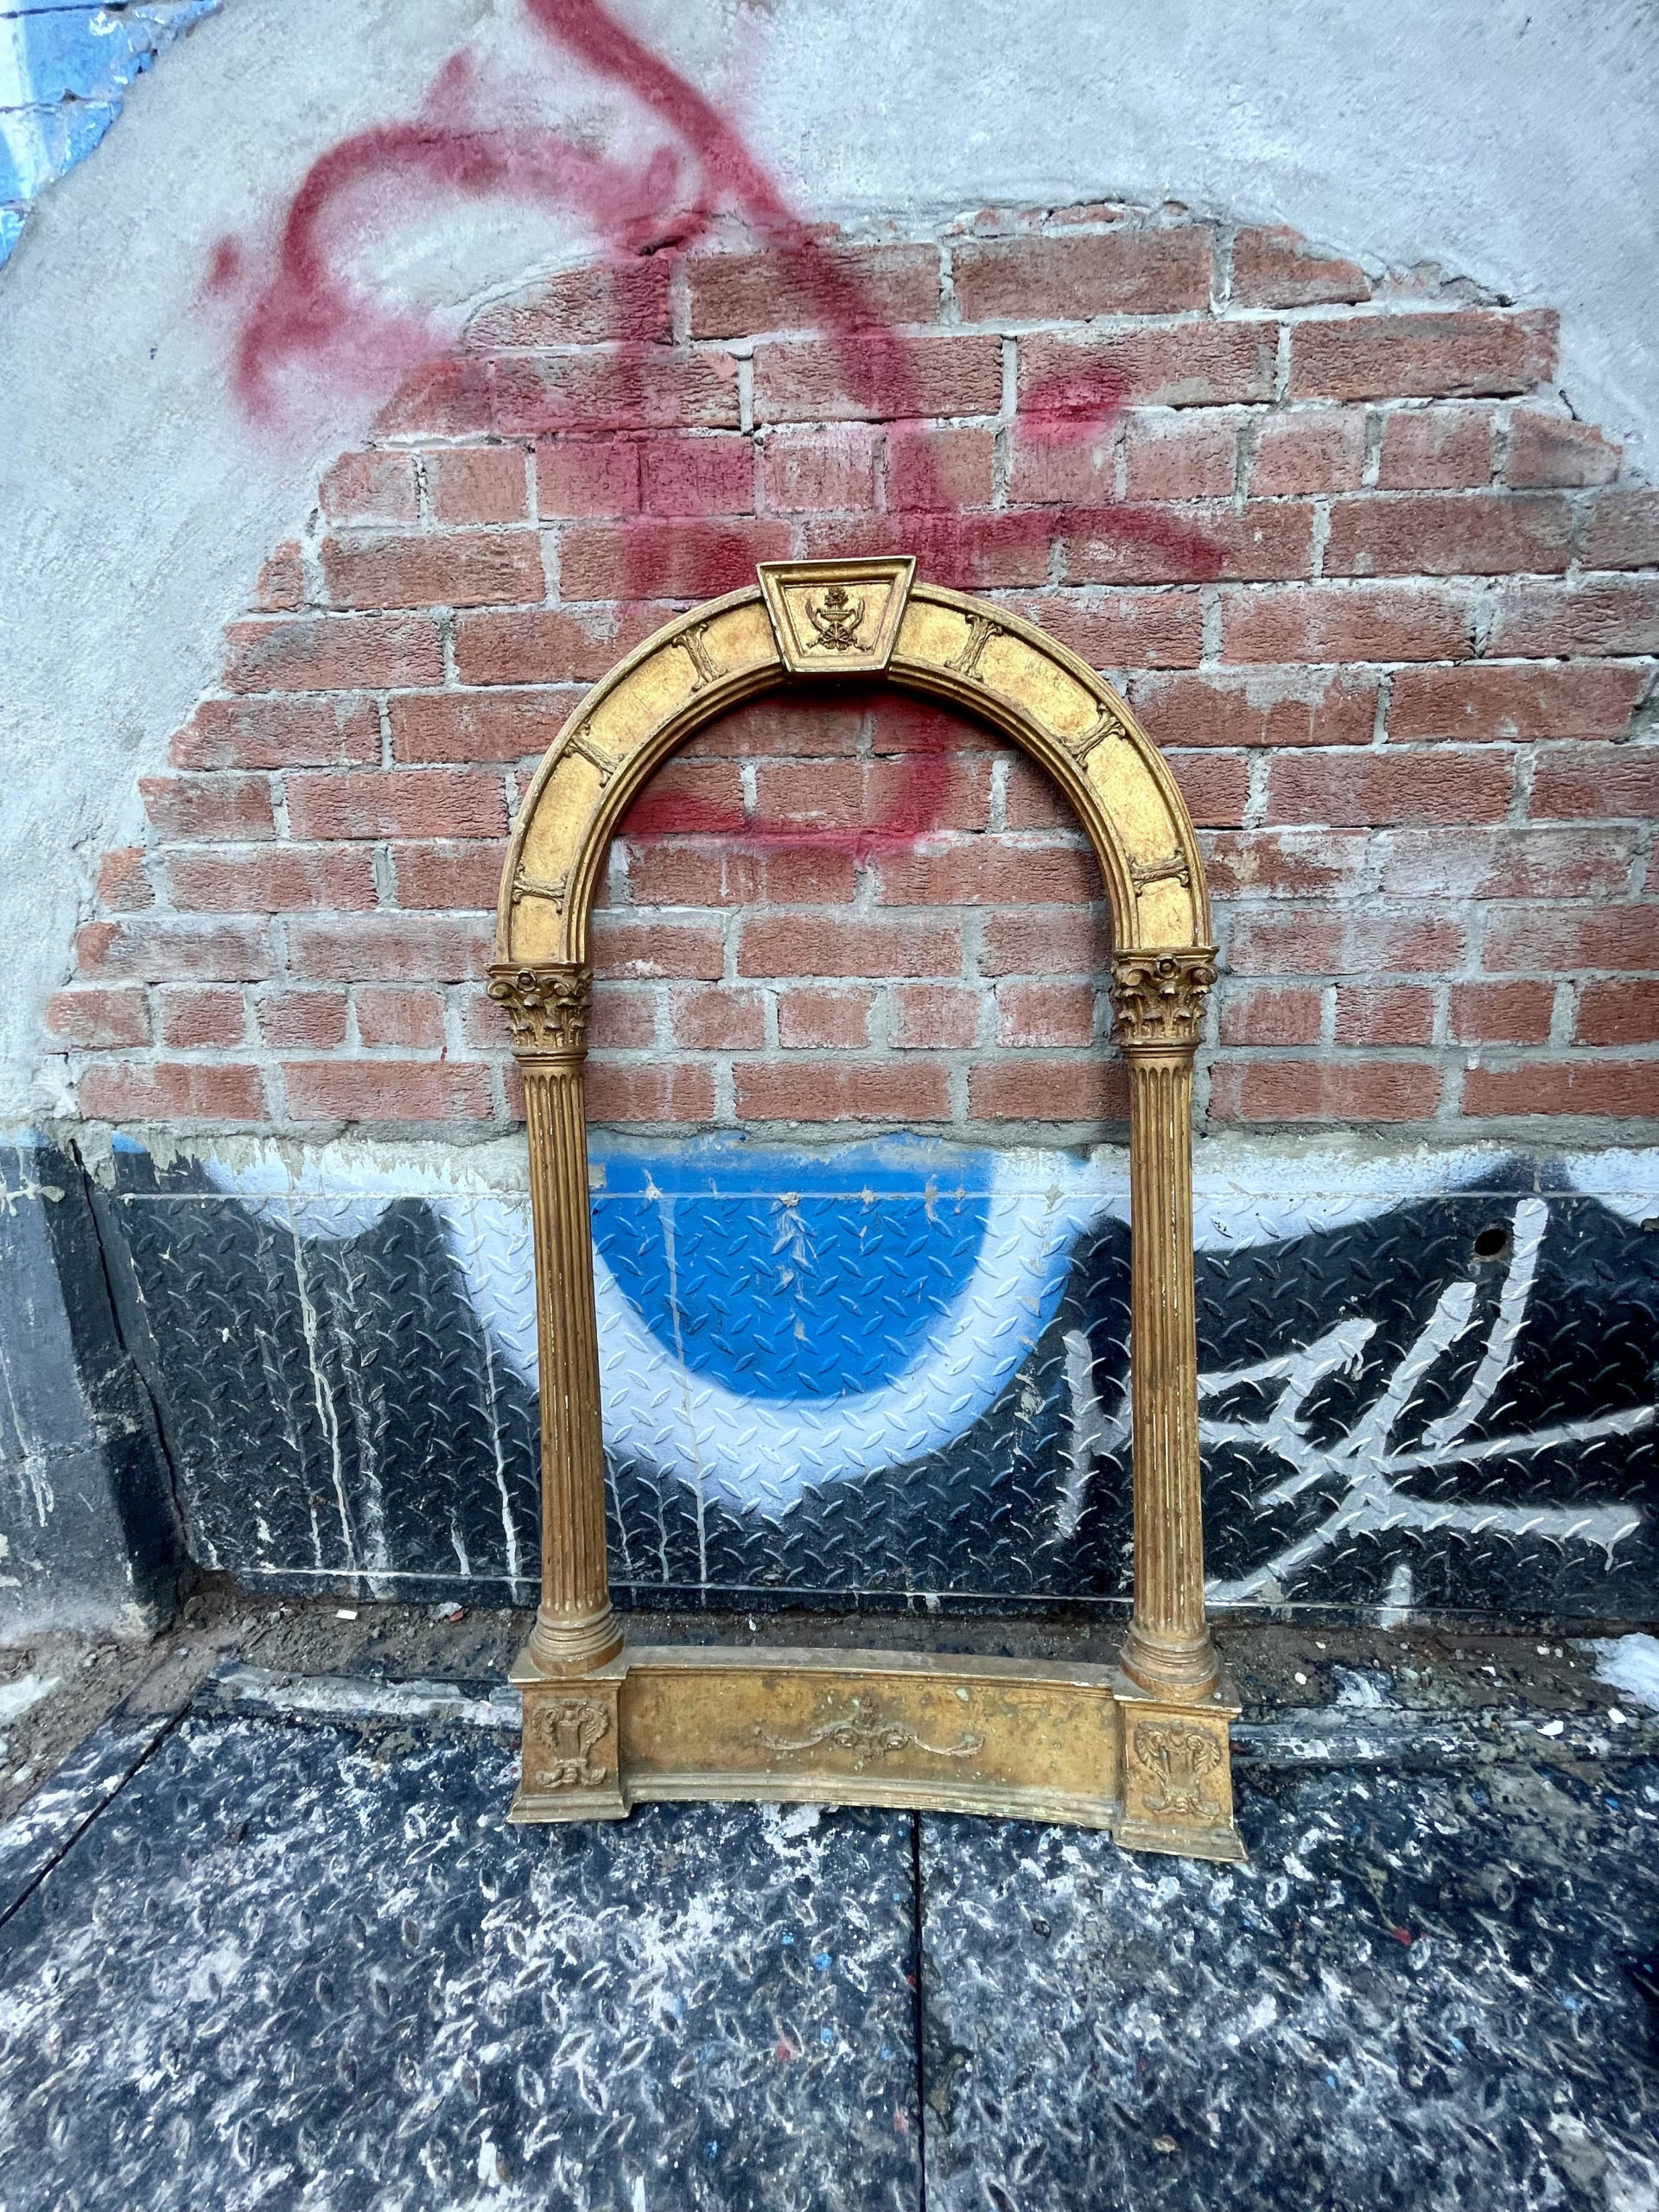 Abandoned frame on a street in New York City.